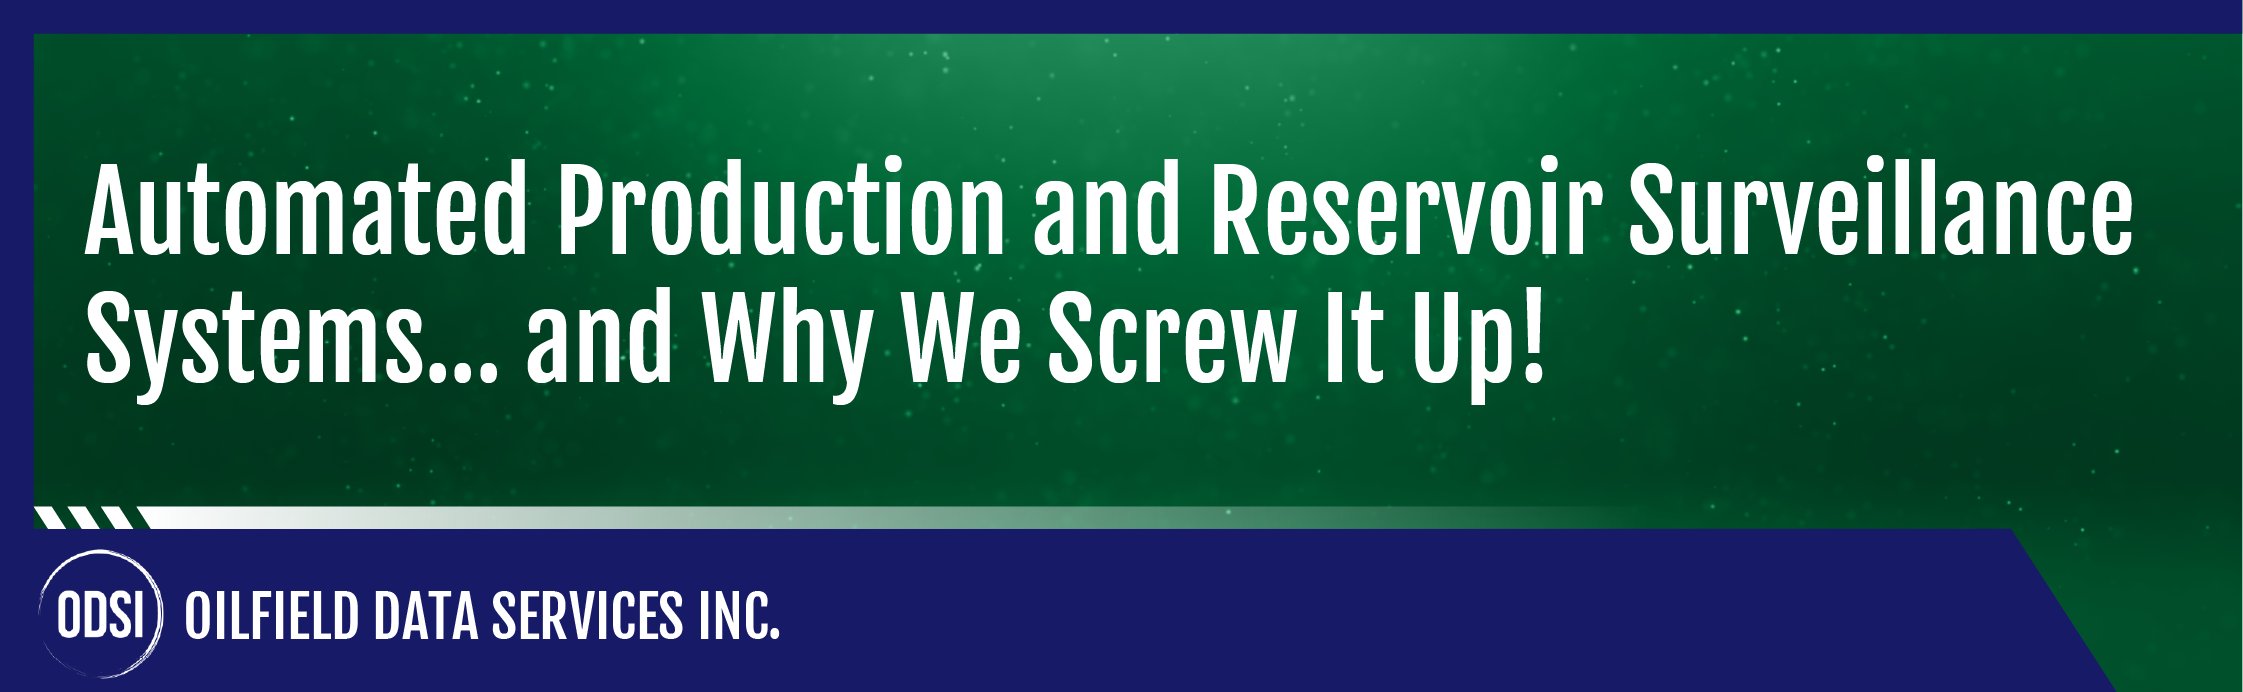 Automated Production and Reservoir Surveillance Systems... and Why We Screw It Up